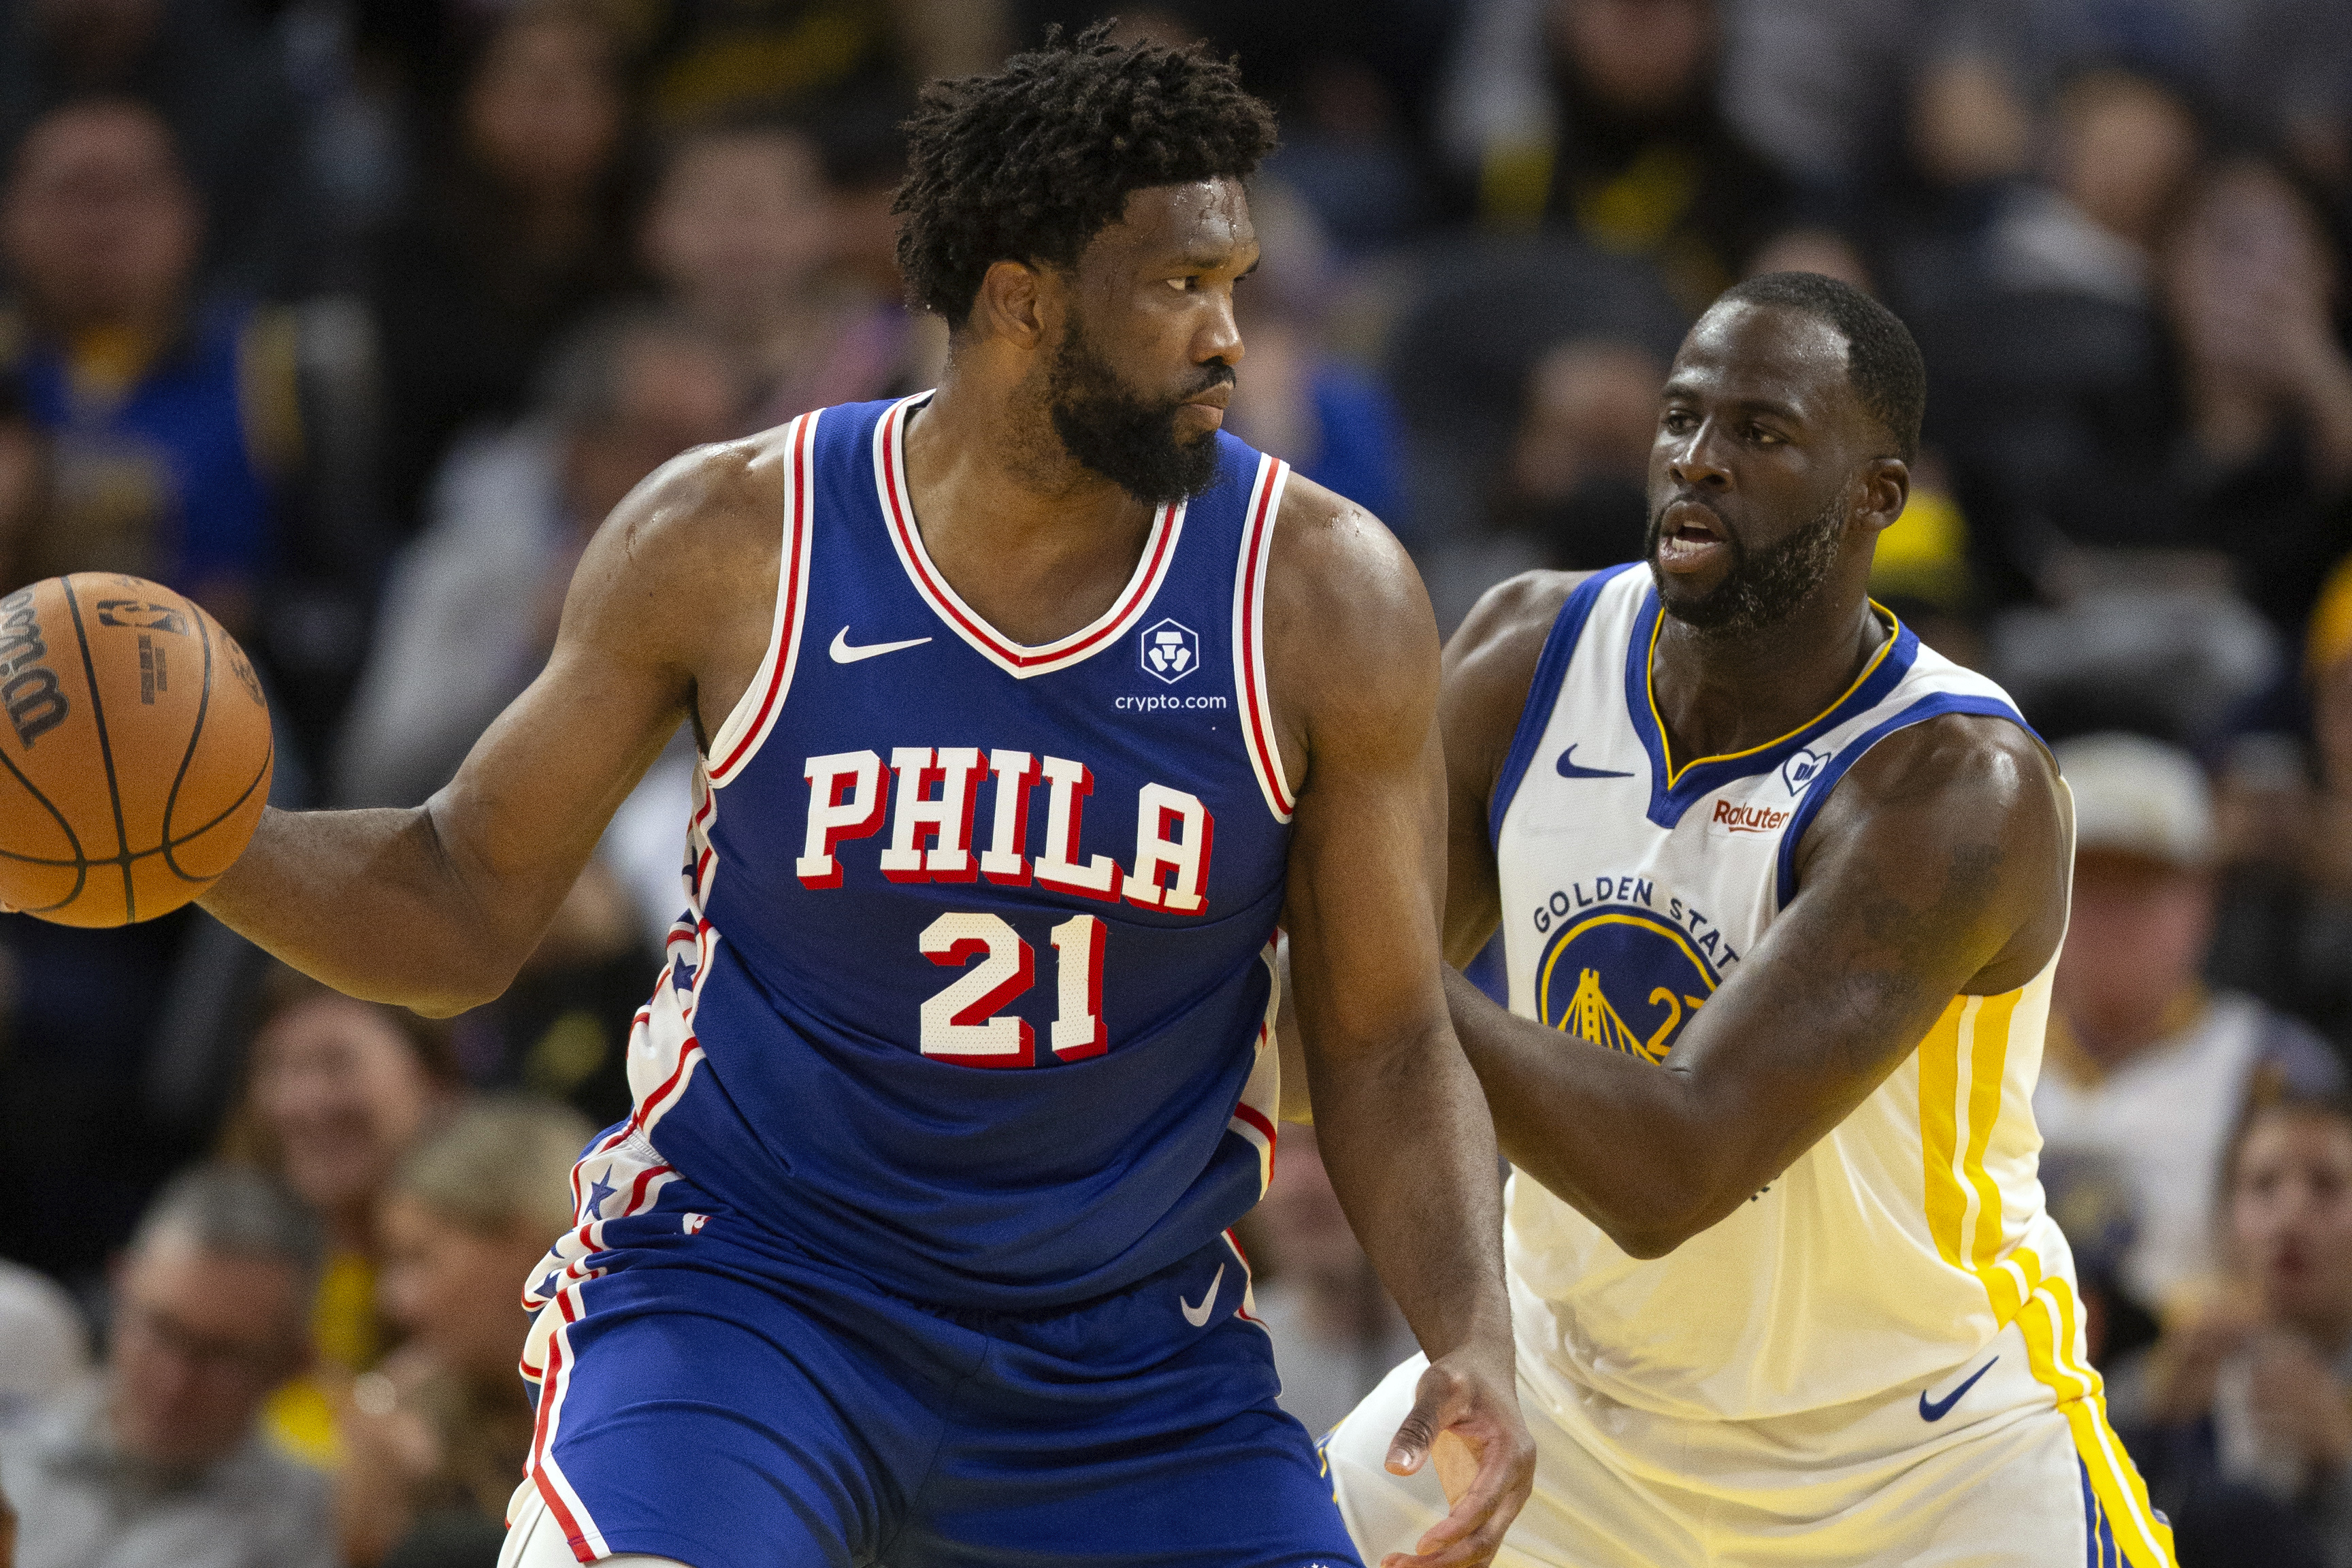 76ers center Joel Embiid has no timetable to return following knee